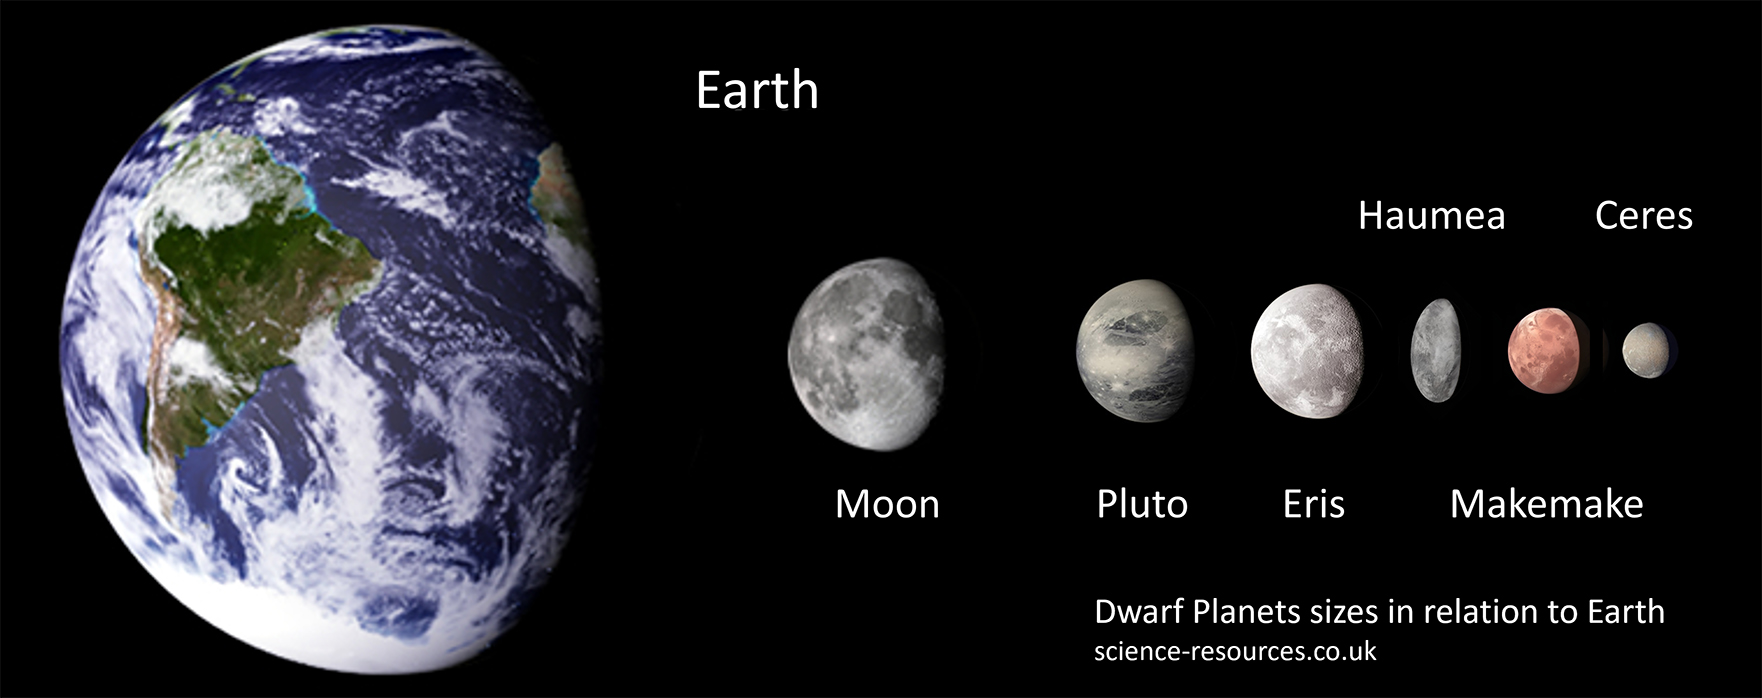 Image showing the dwarf planets in our solar system and sizes compared to the Earth and Moon. From left to right: Pluto, Eris, Haumea, Makemake and Ceres.